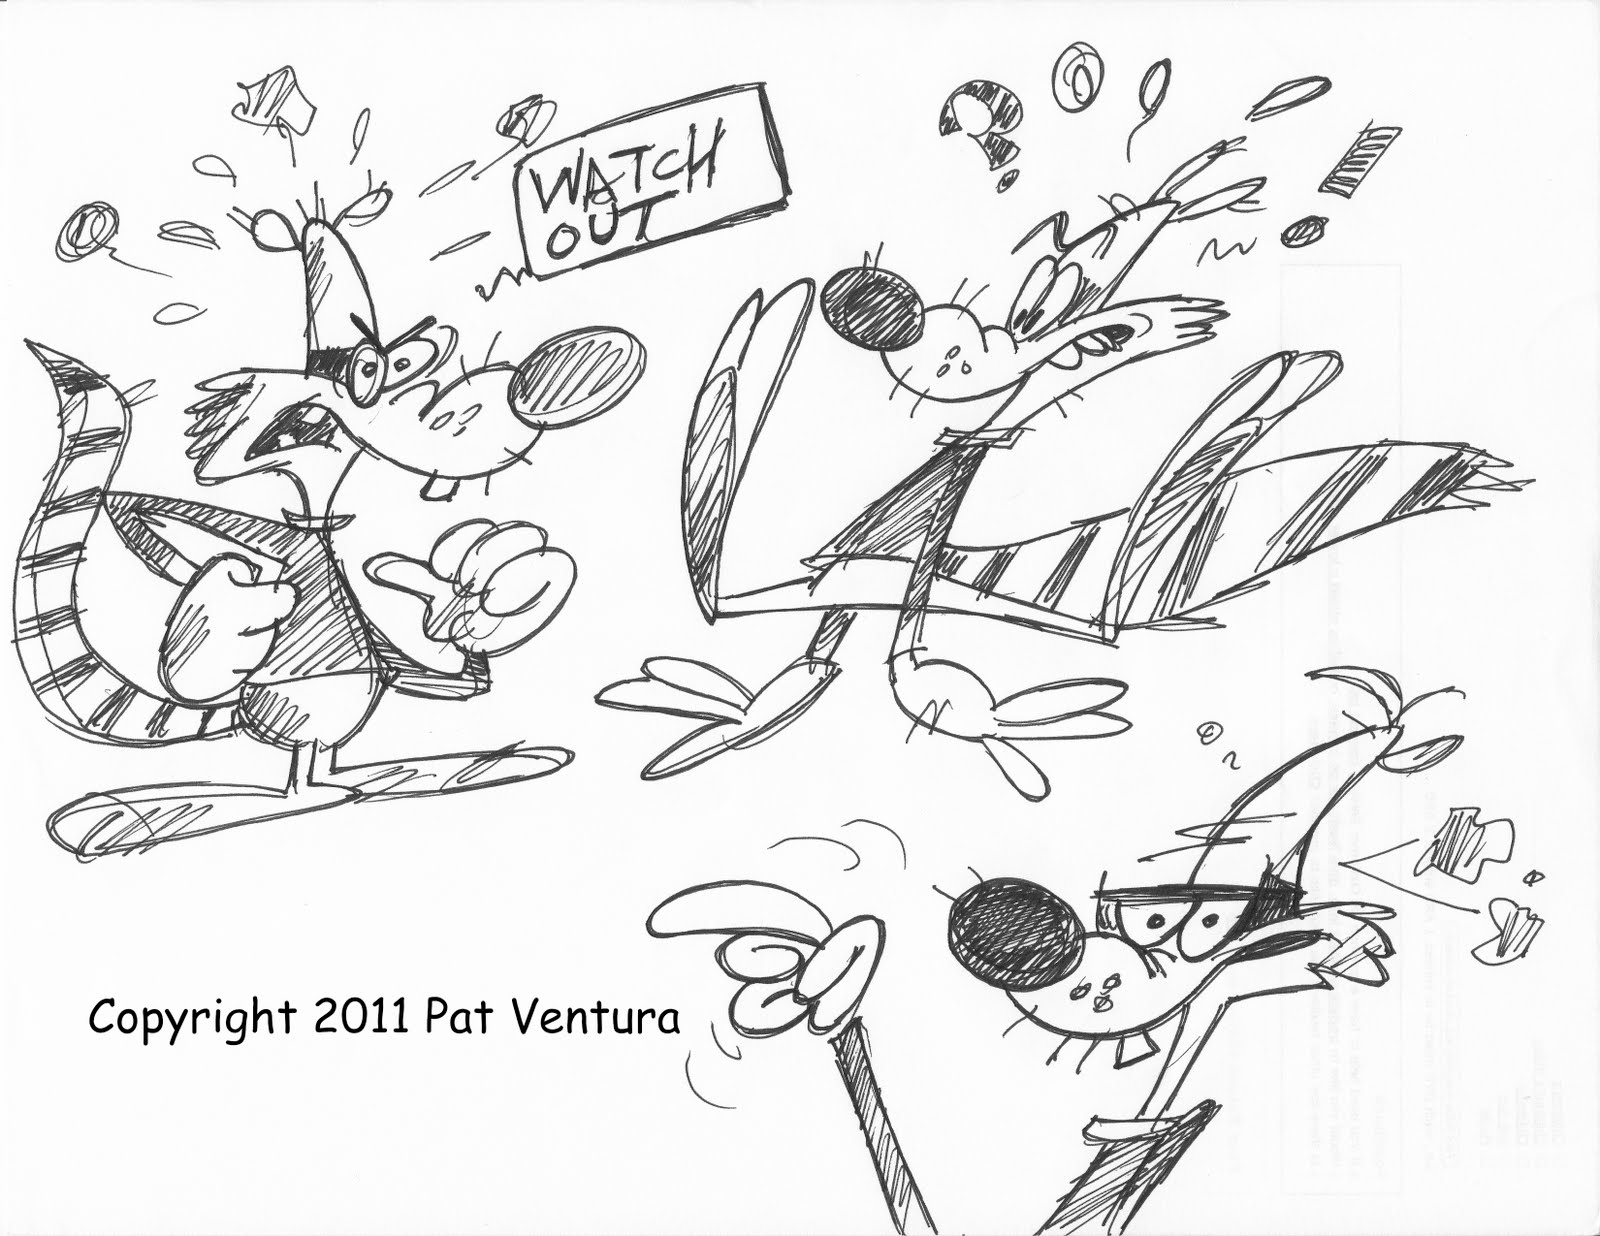 'Pat' Ventura's VenturaToons: Silly Sketches